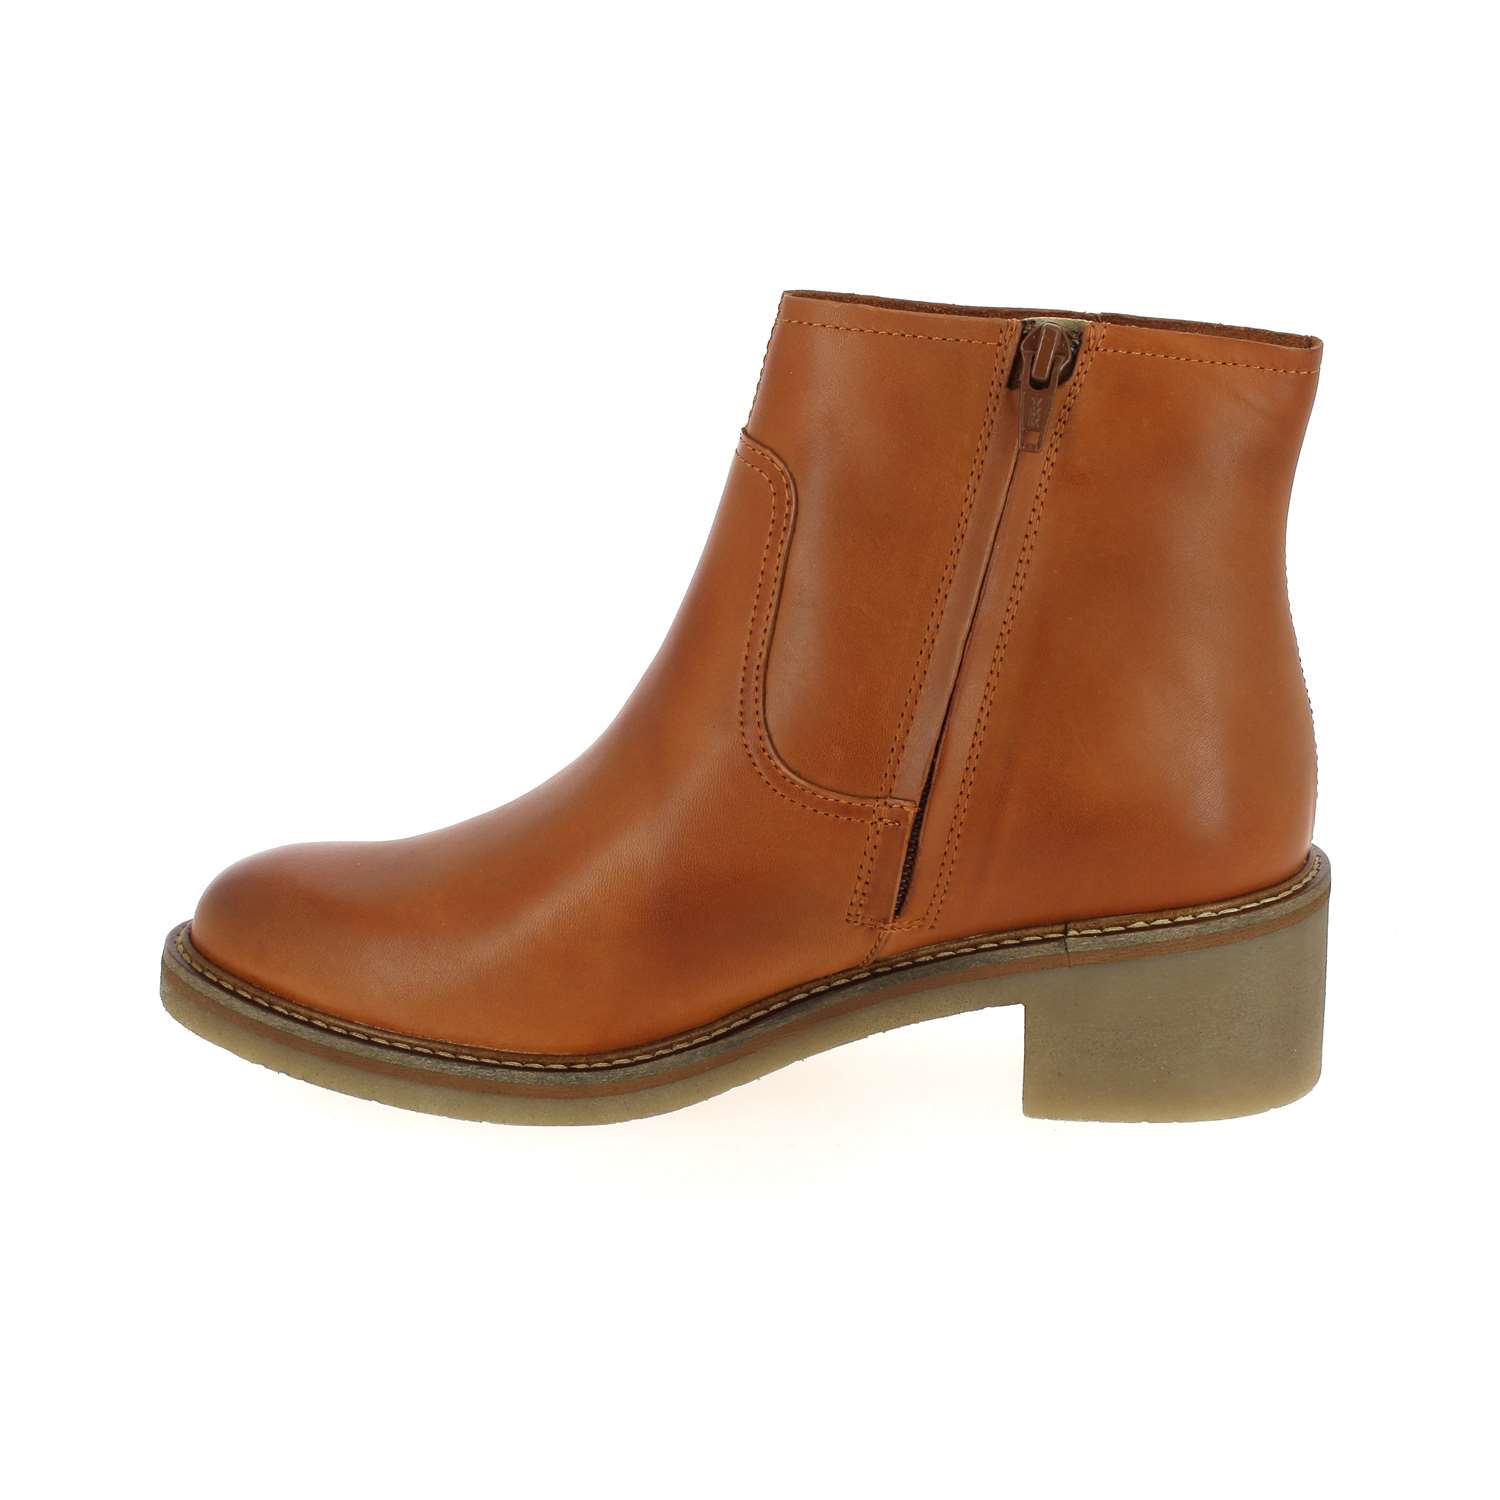 05 - OXYBOOT - KICKERS - Boots et bottines - Cuir